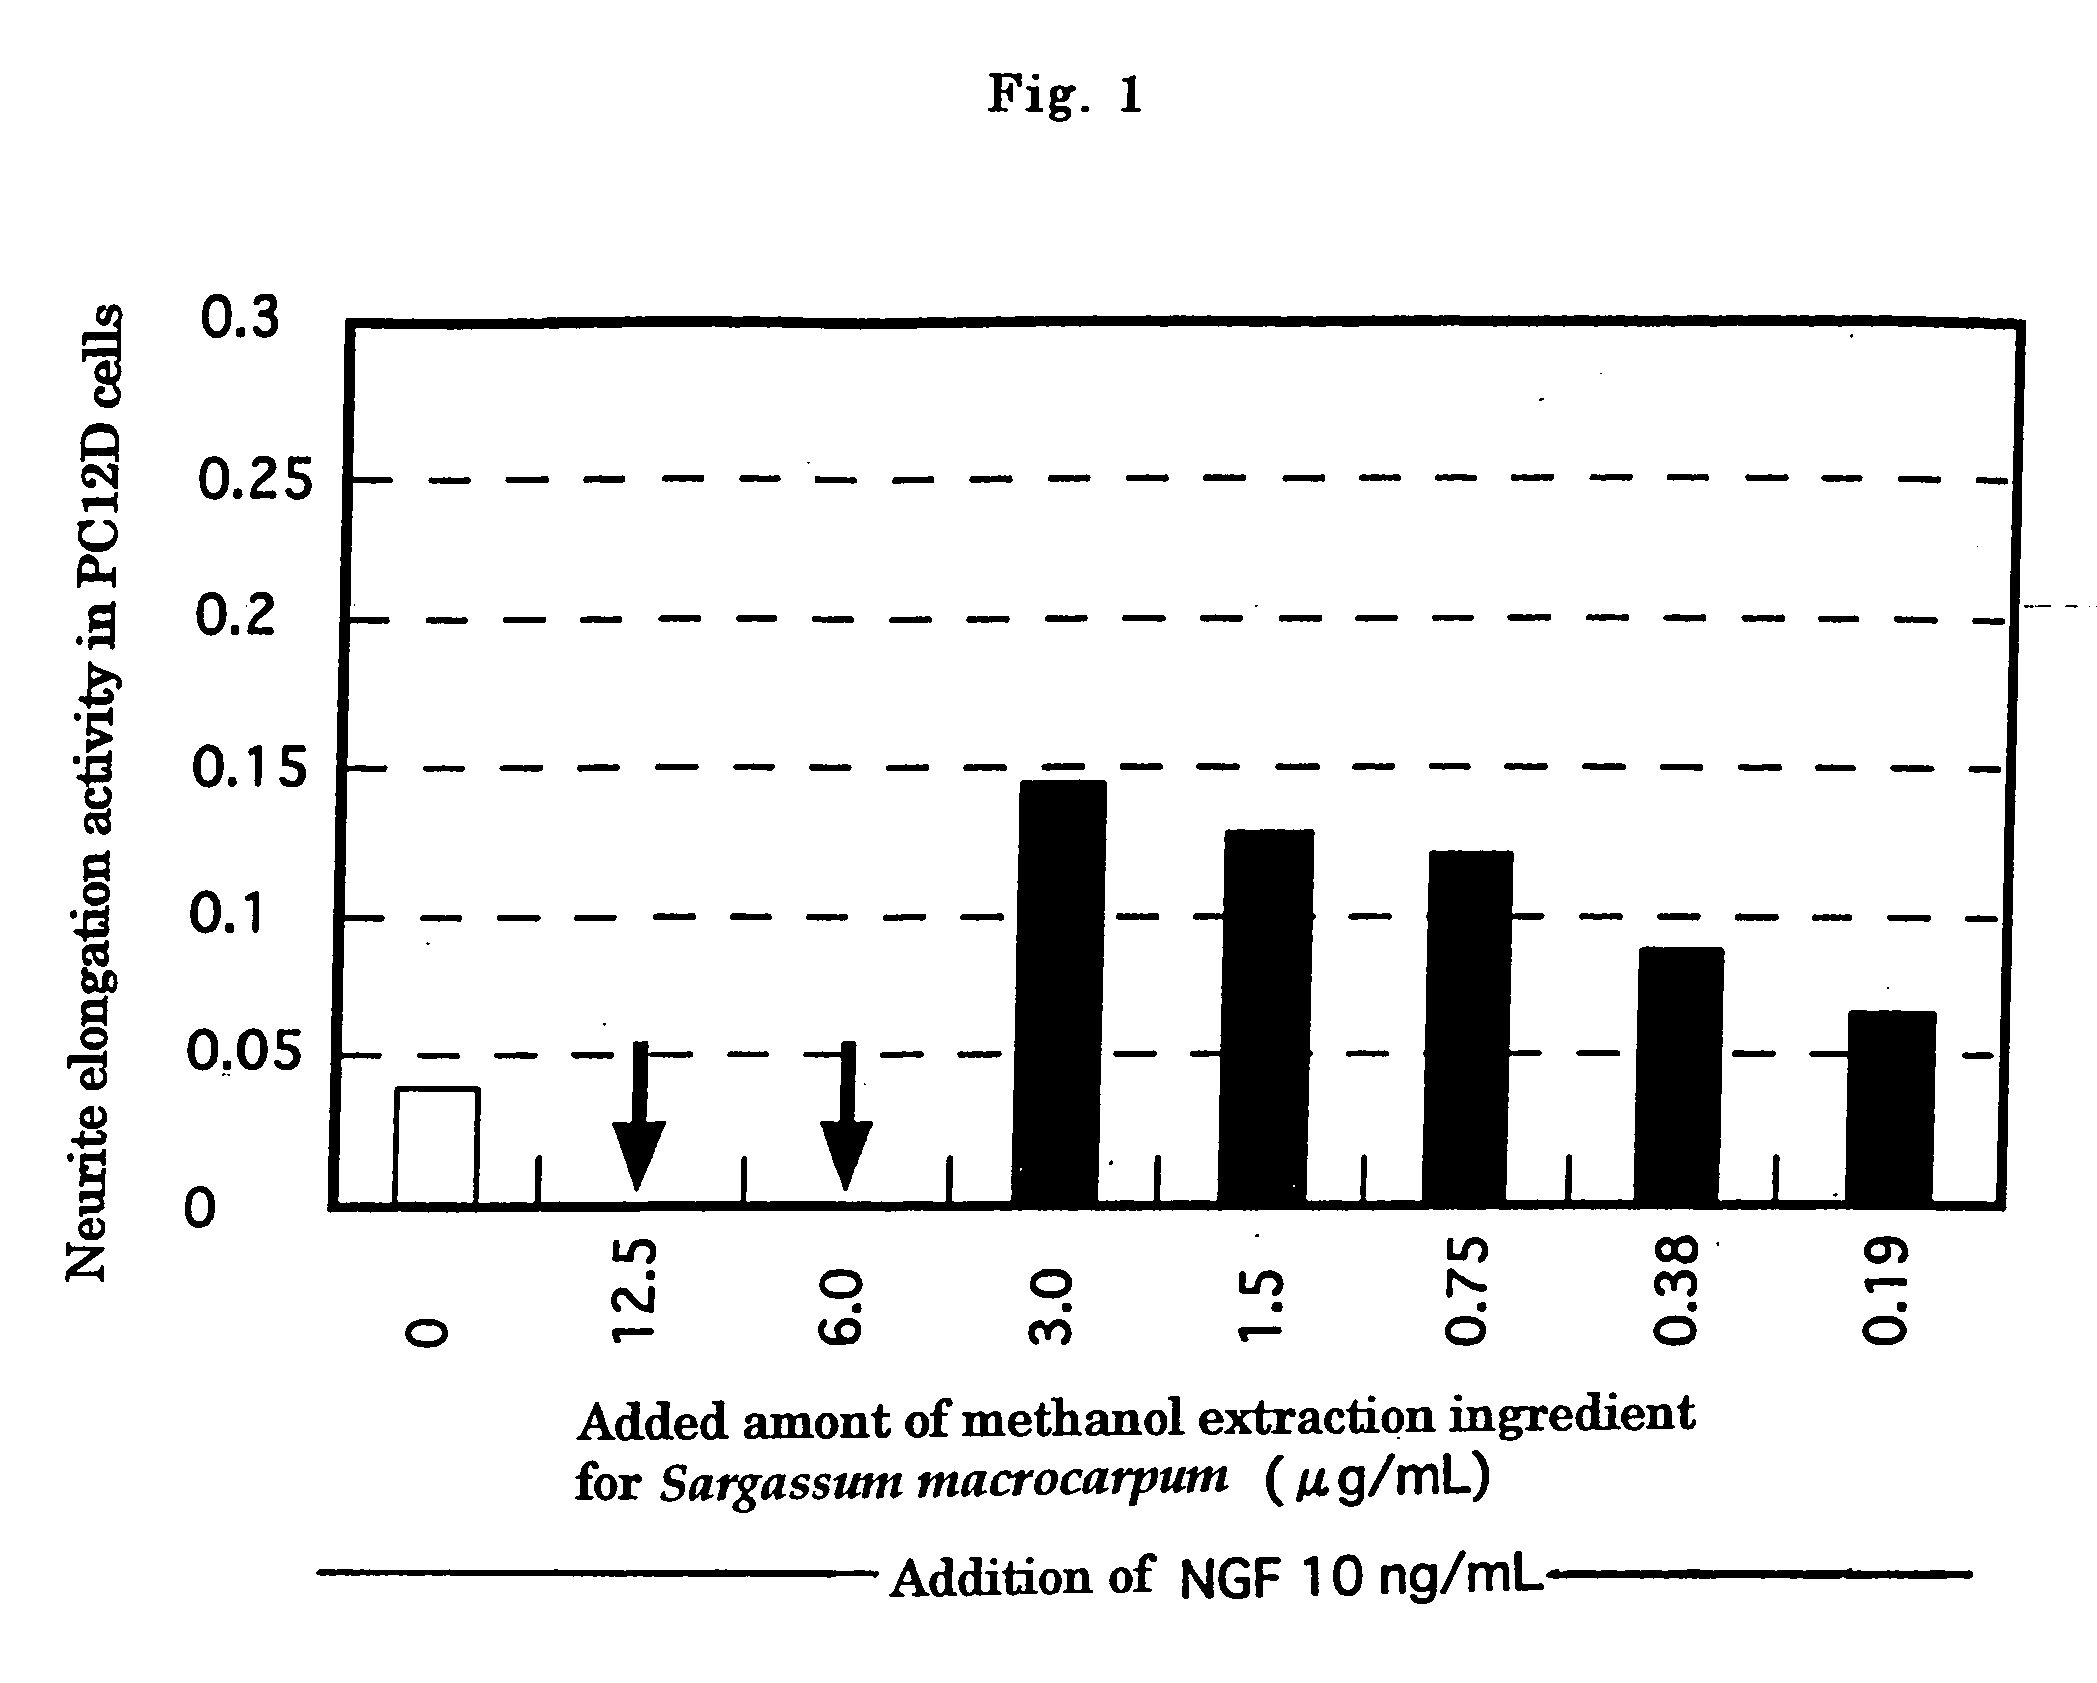 Nerve growth factor activity potentiating agents